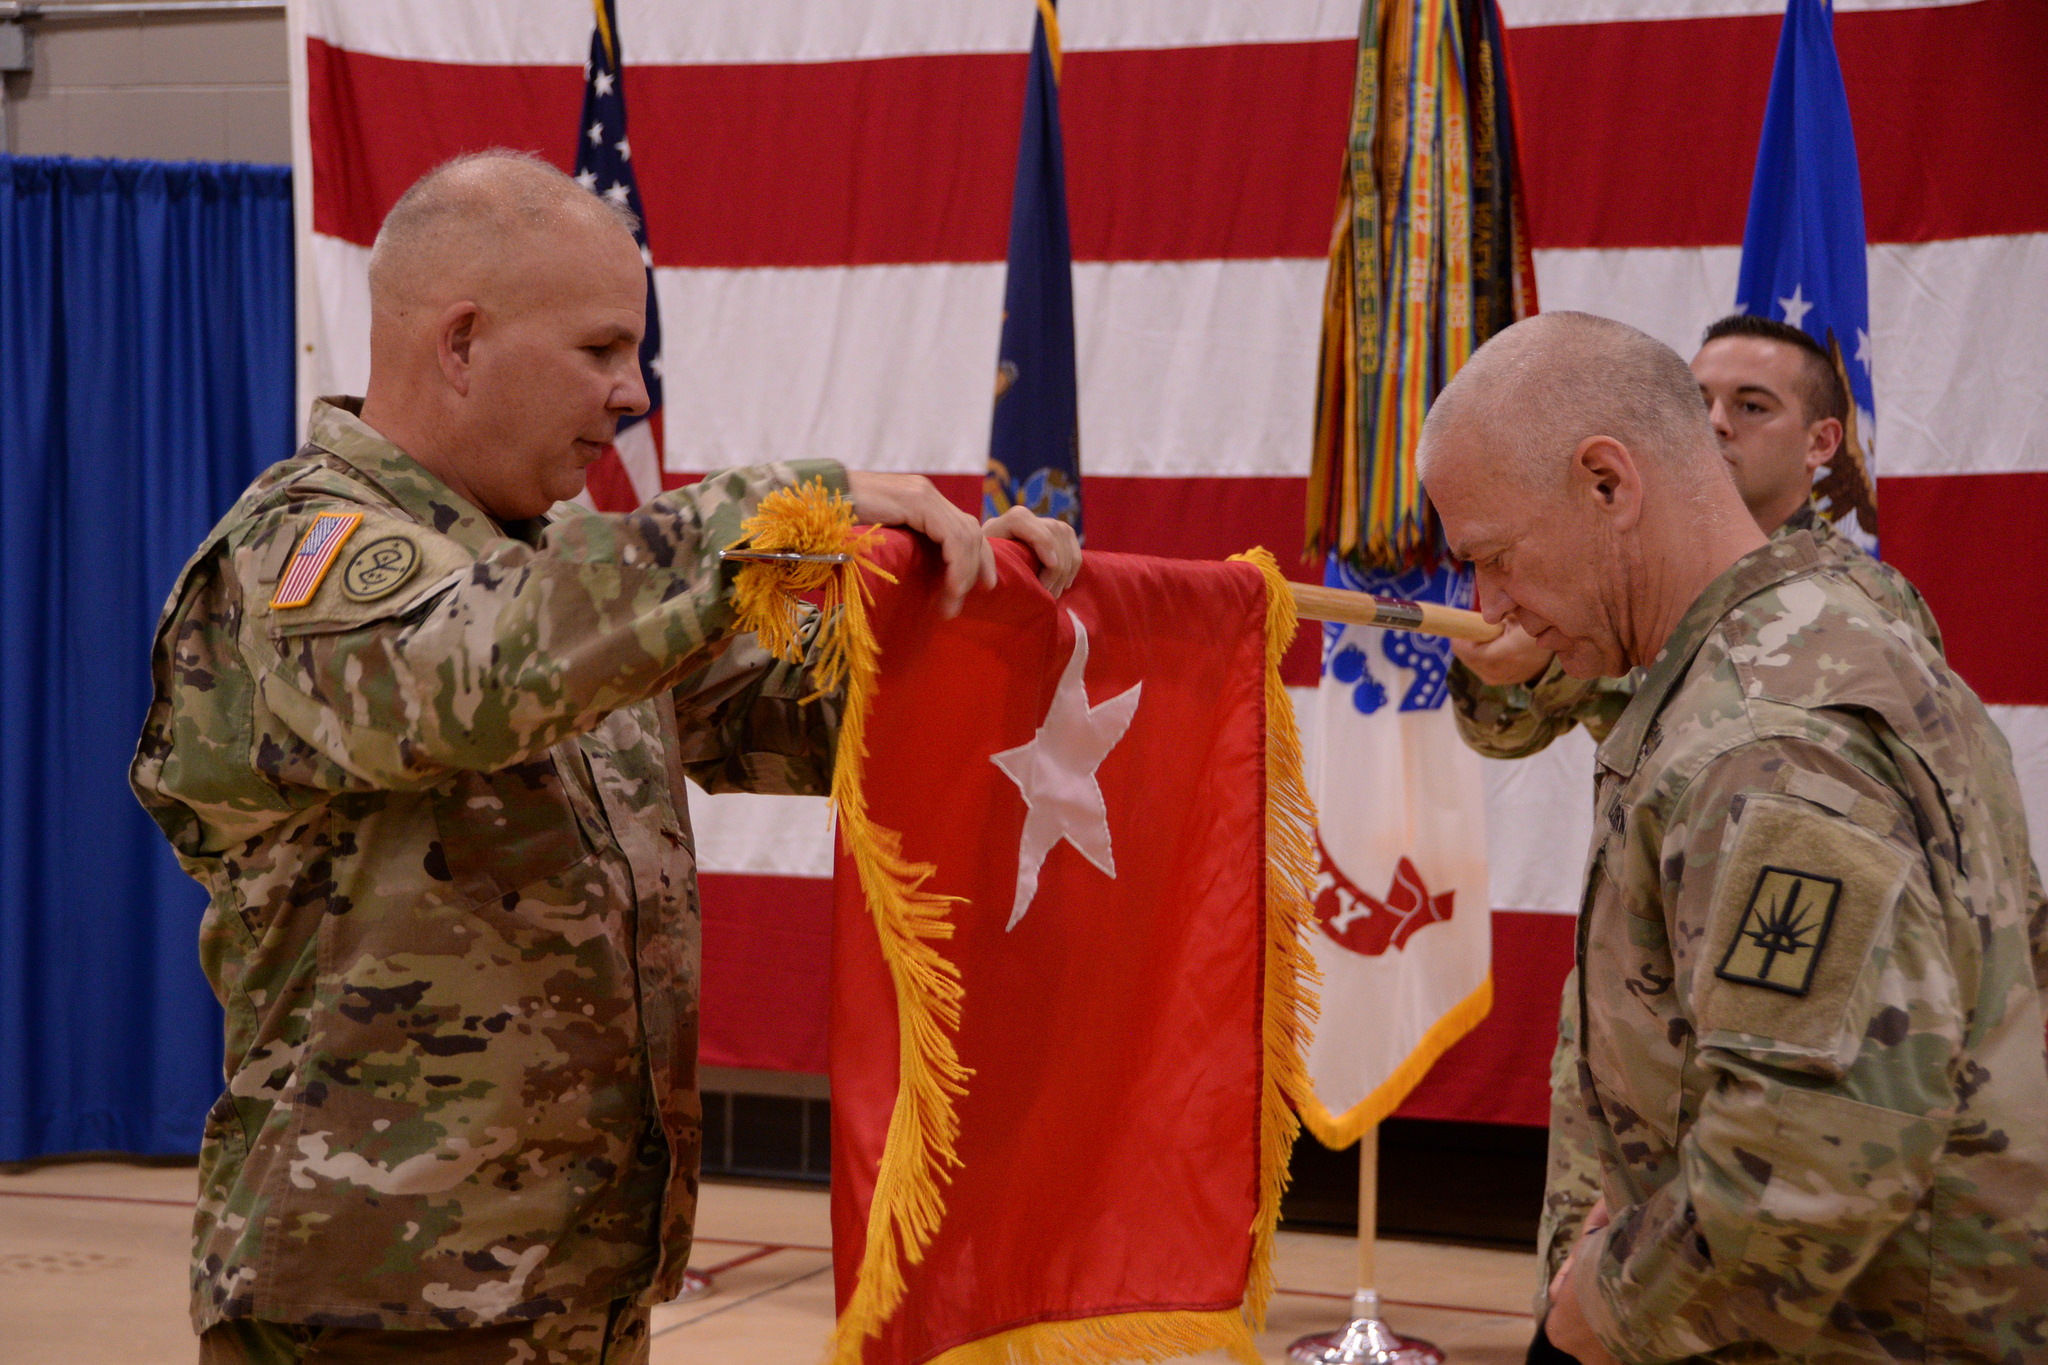 Saratoga Springs resident promoted to major general